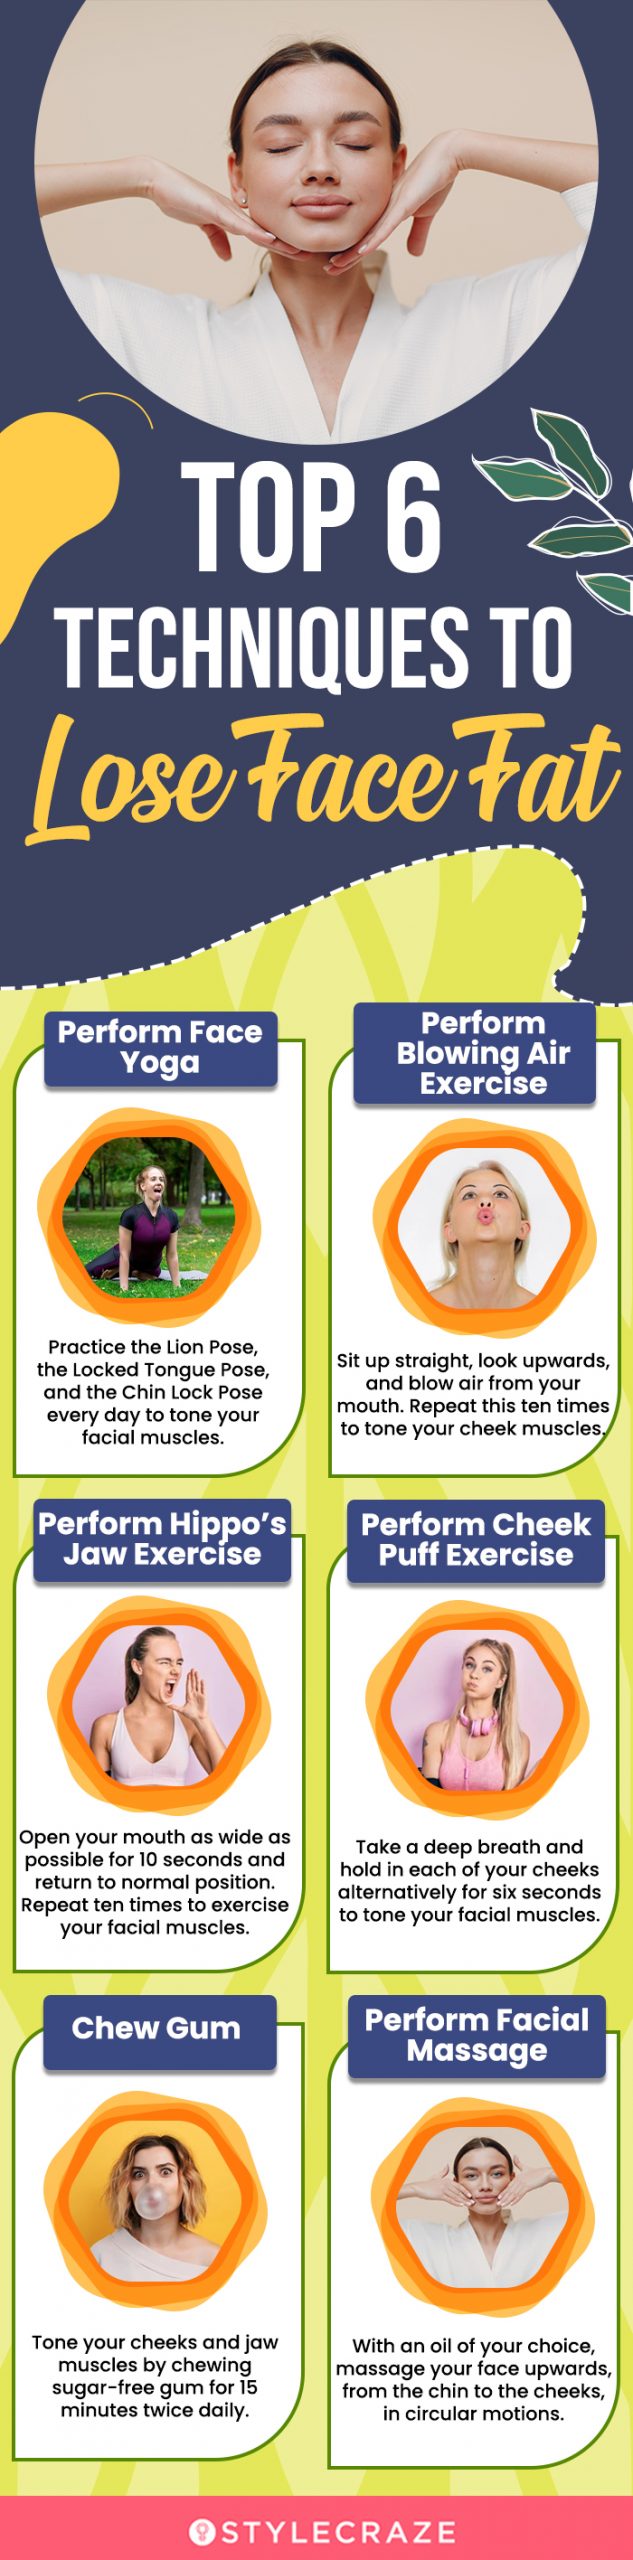 top 6 techniques to lose face fat (infographic)